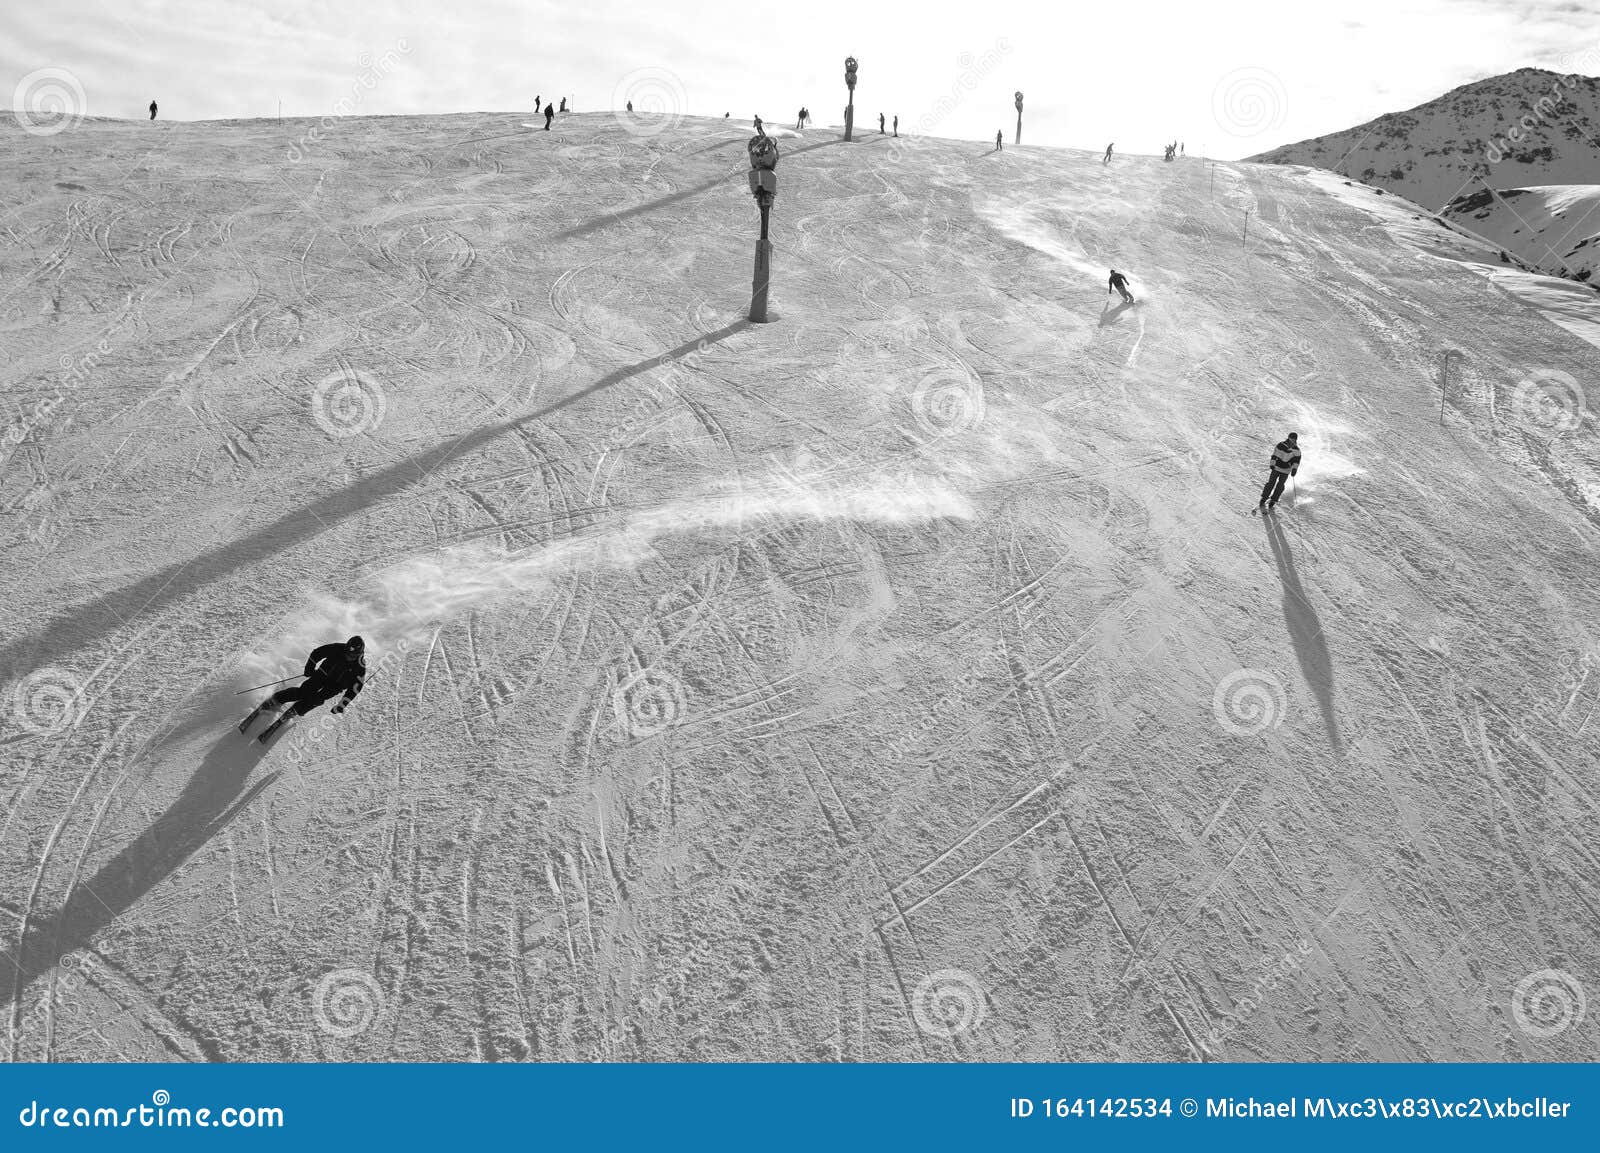 swiss alps: skiing on artificial snow due to the global climate change at parsenn above davos city